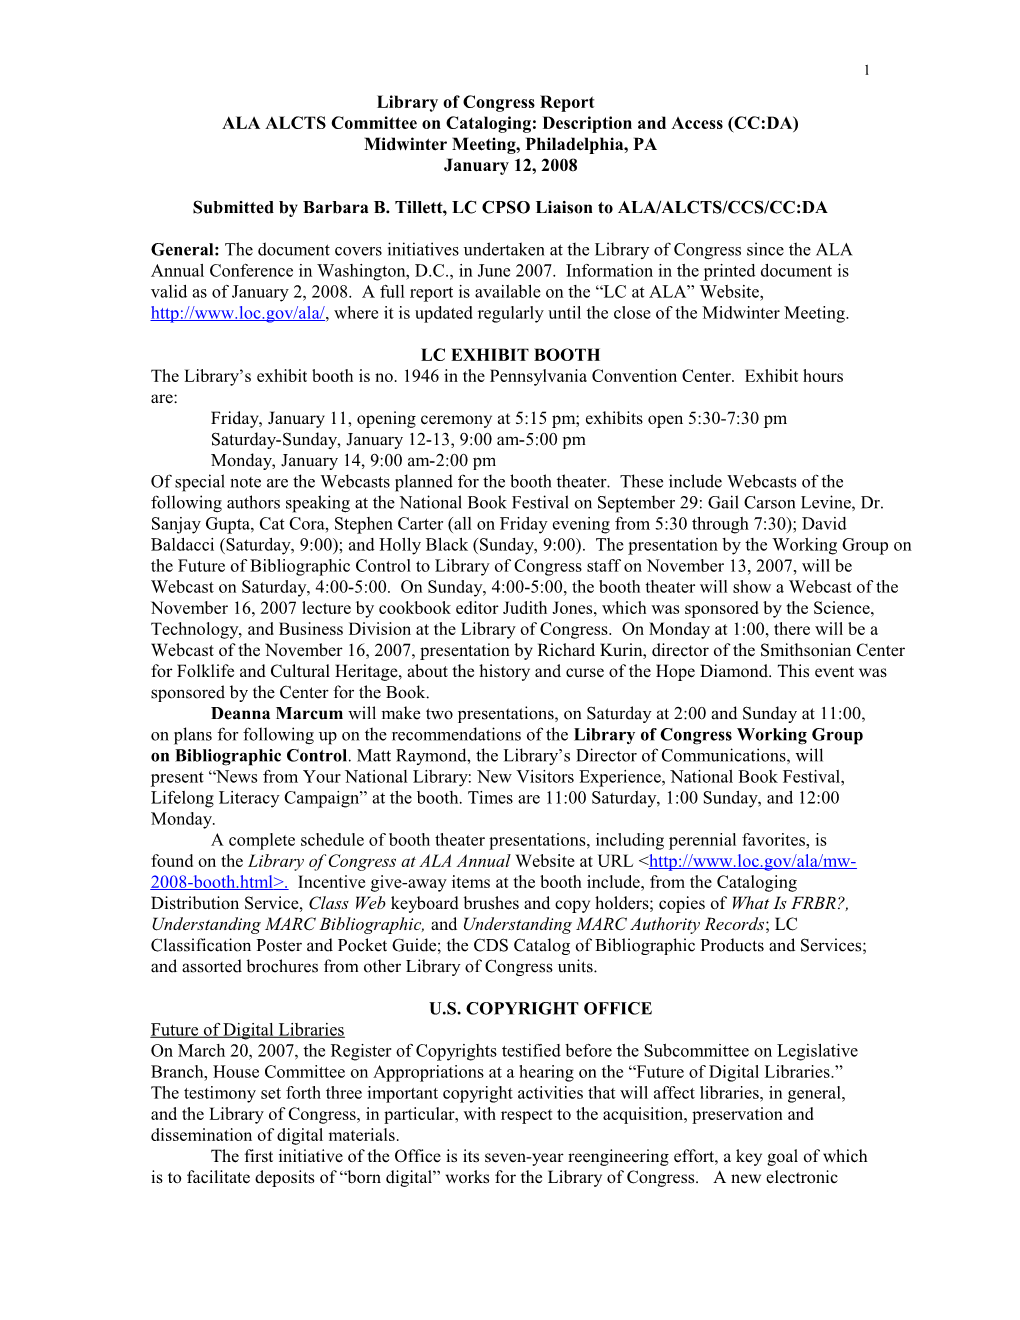 ALA ALCTS Committee on Cataloging: Description and Access (CC:DA)